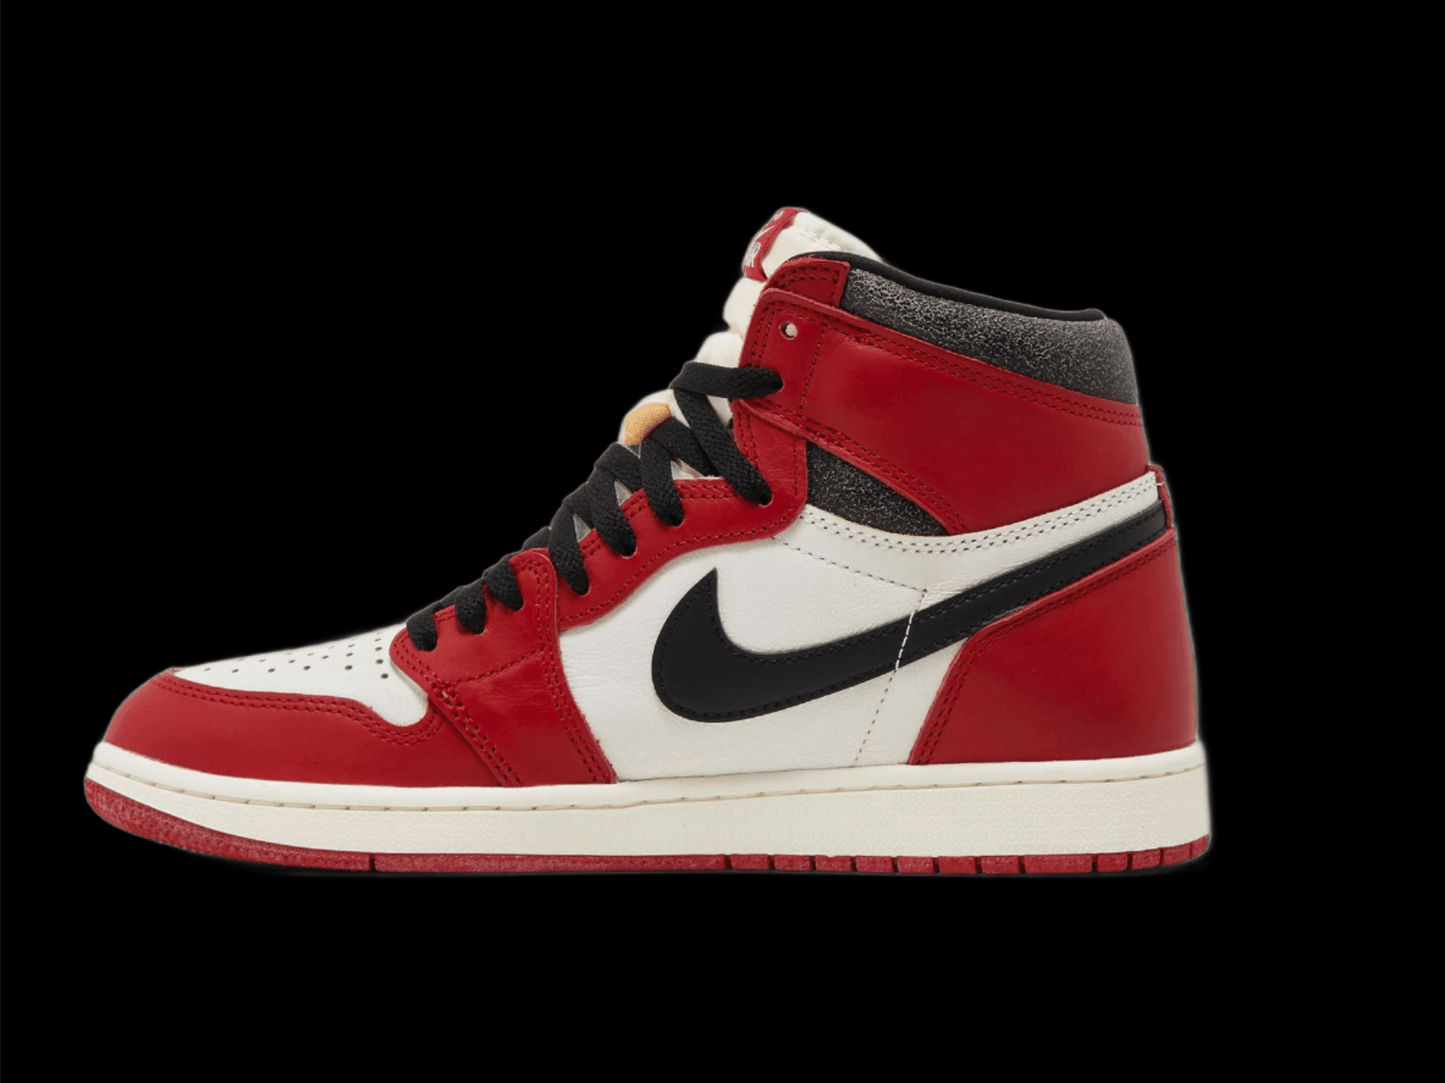 NIKE AIR JORDAN 1 RETRO HIGH OG CHICAGO LOST AND FOUND (GS) WOMEN'S